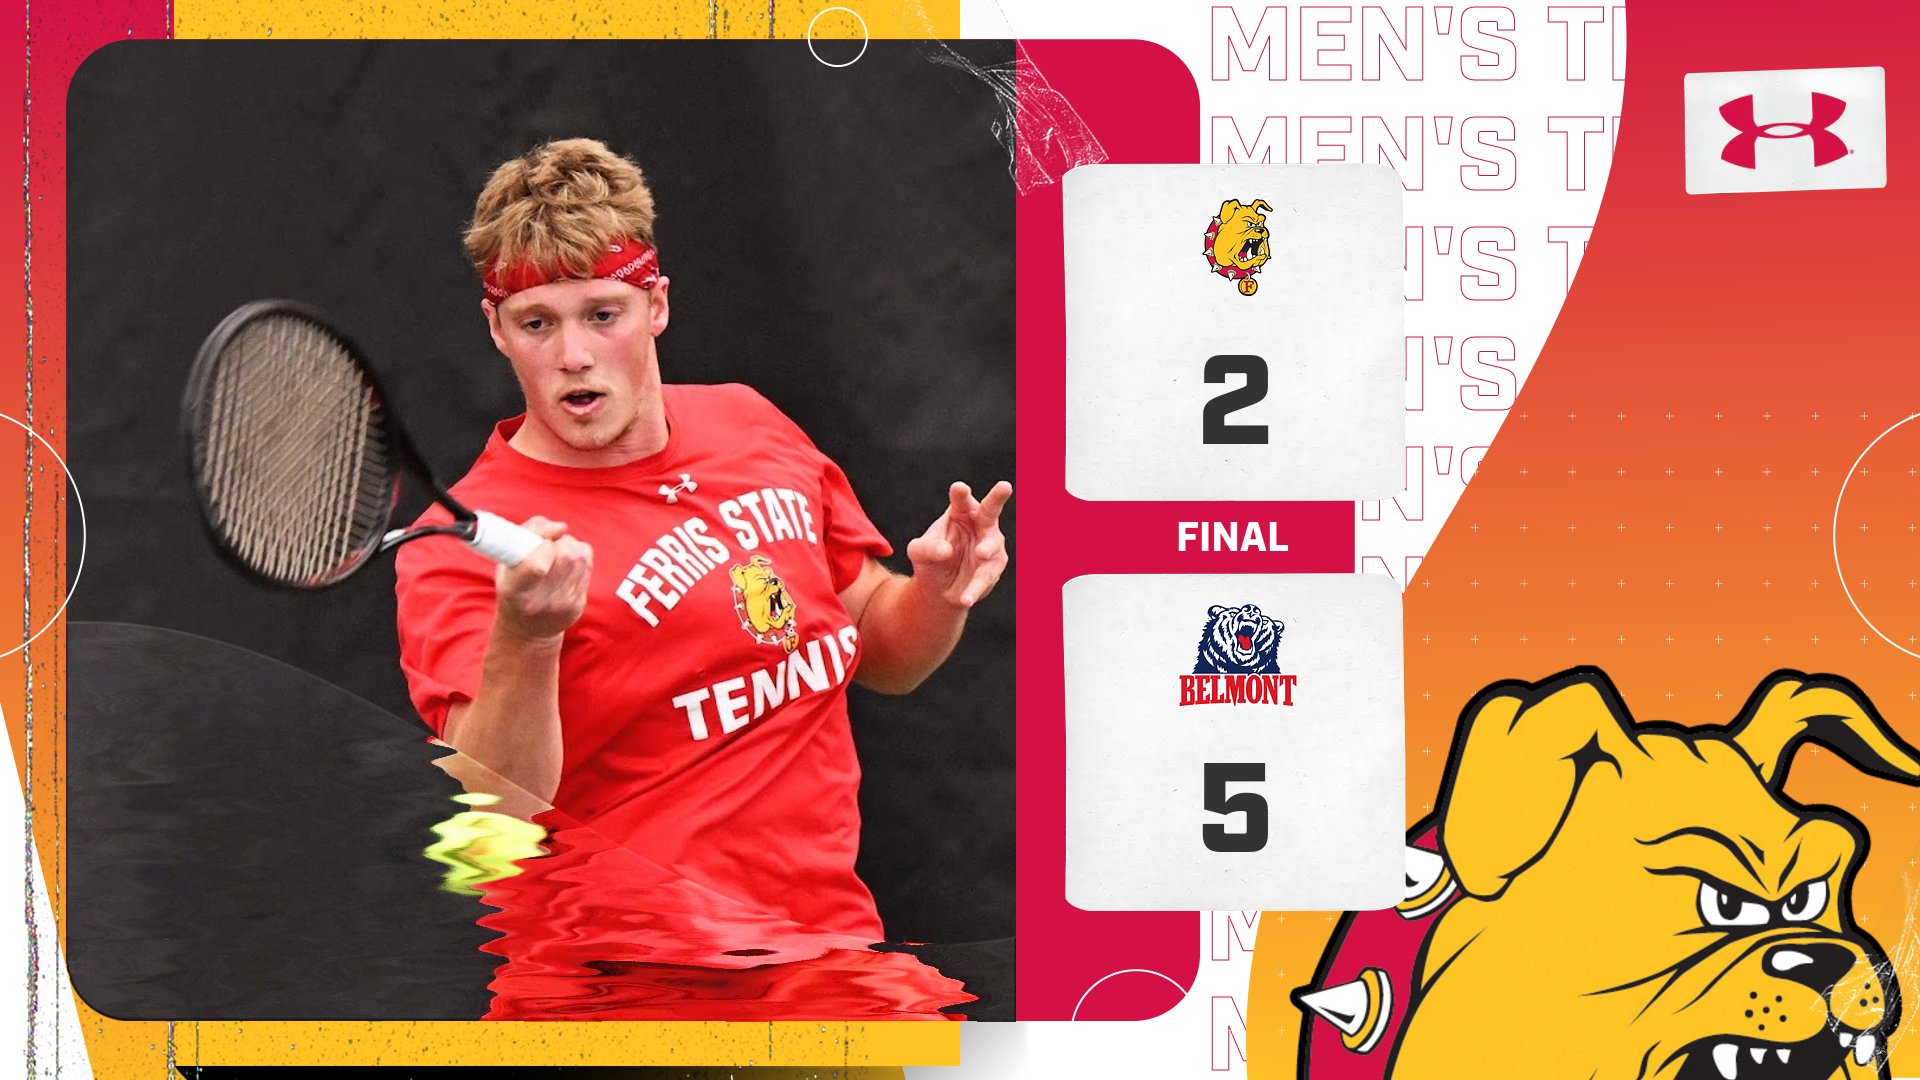 Ferris State Men's Tennis Starts Strong In Setback To NCAA D1 Belmont In Florida